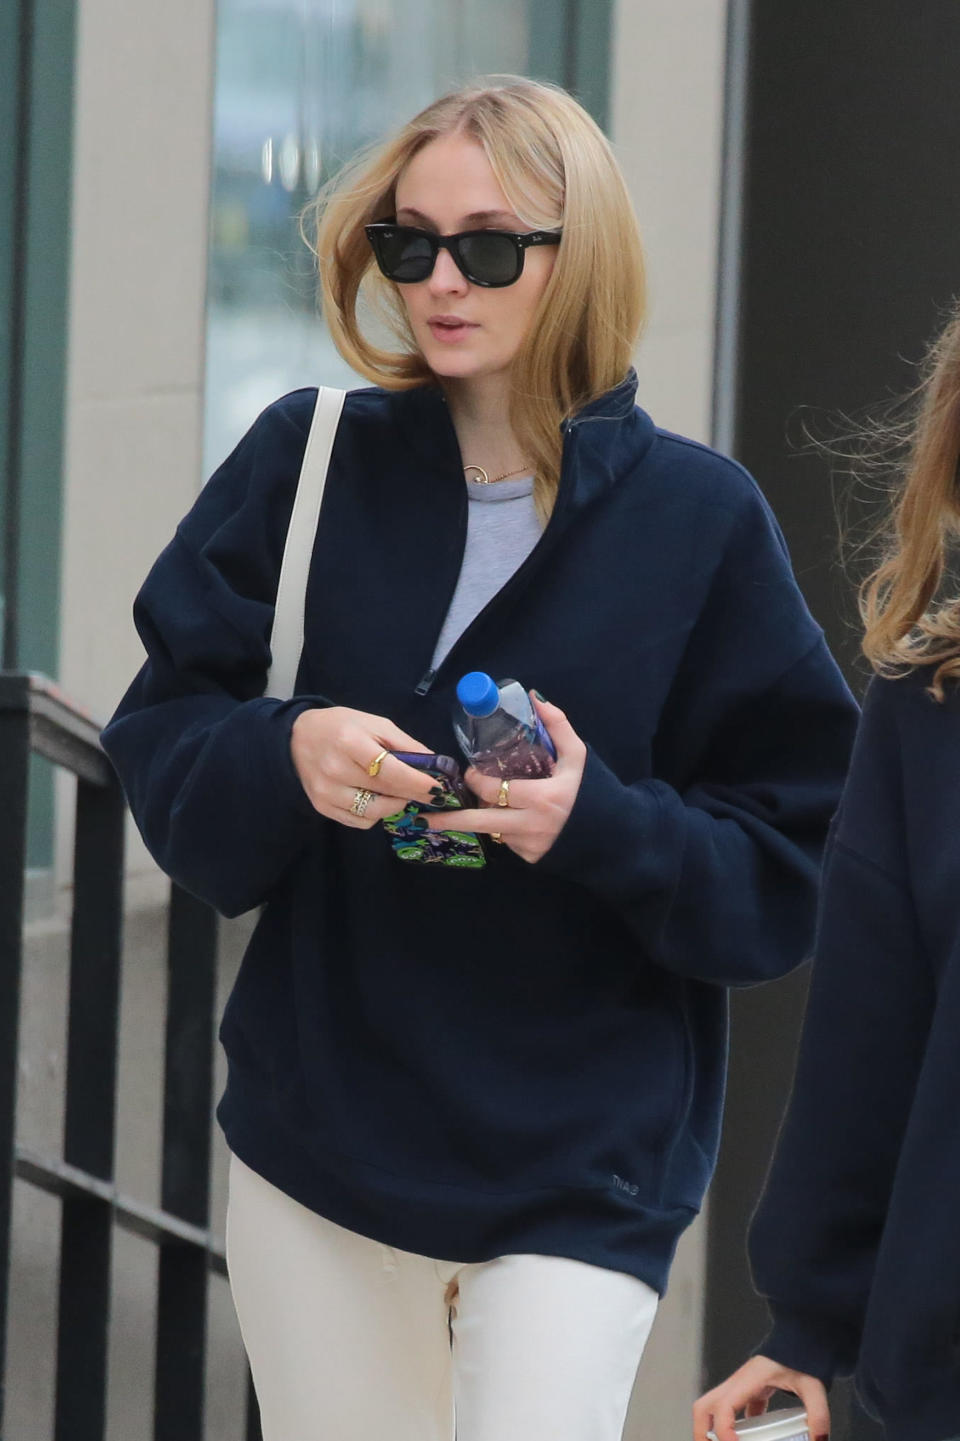 Sophie Turner walks outside wearing a dark pullover, sunglasses, and holding a water bottle